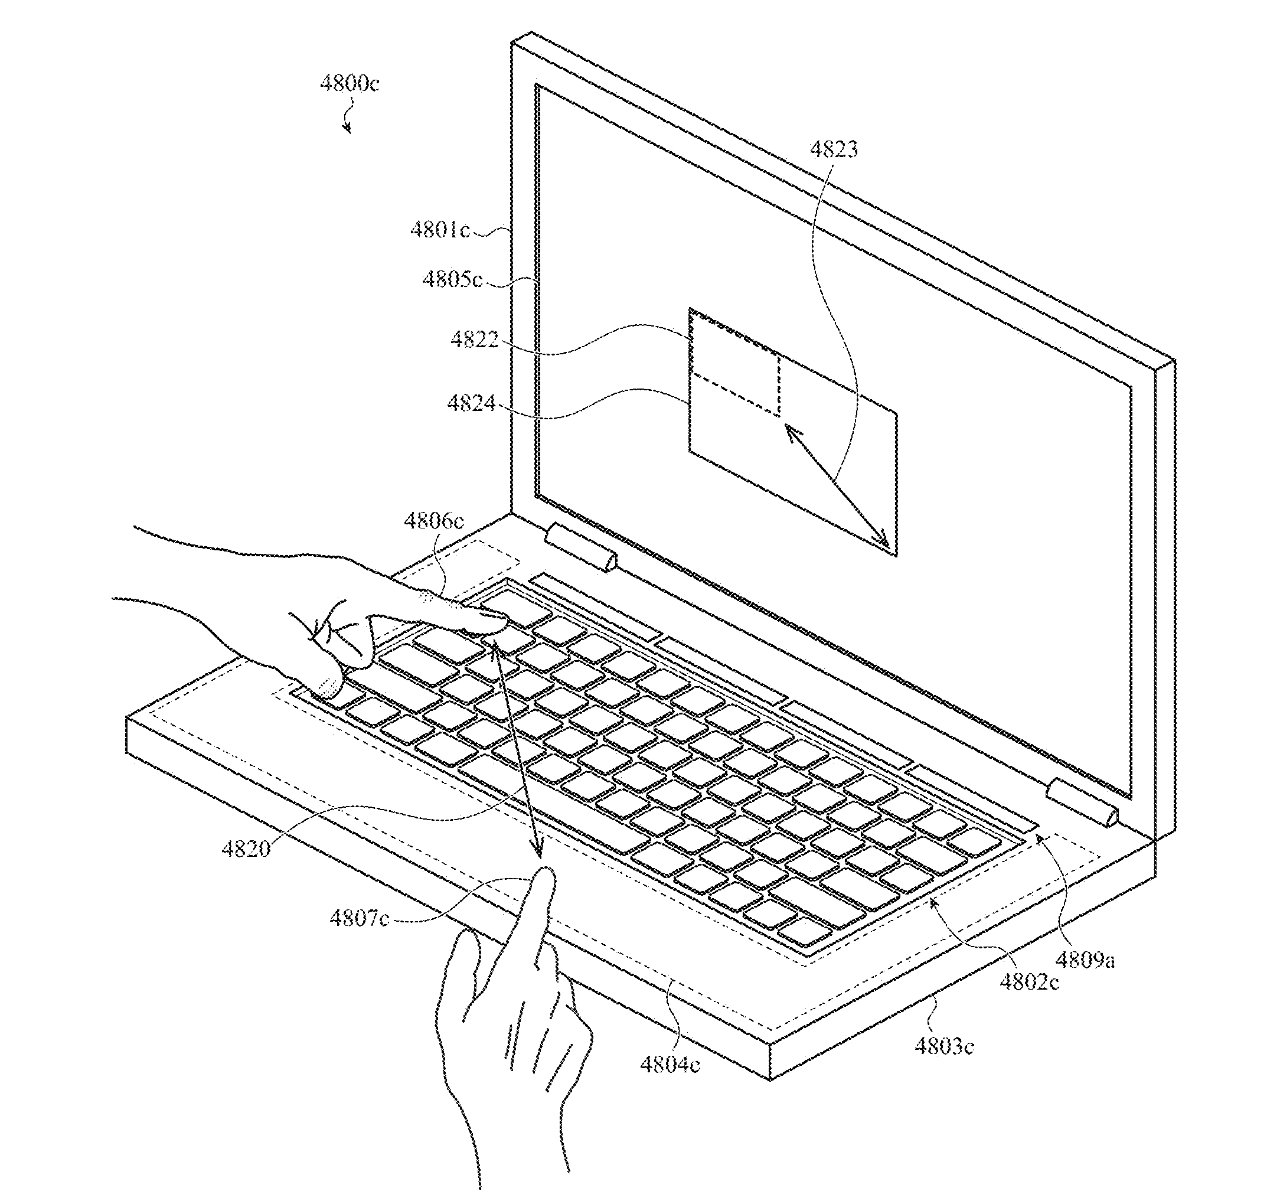 Detail from the patent showing how, even with a keyboard displayed, you could draw lines on screen